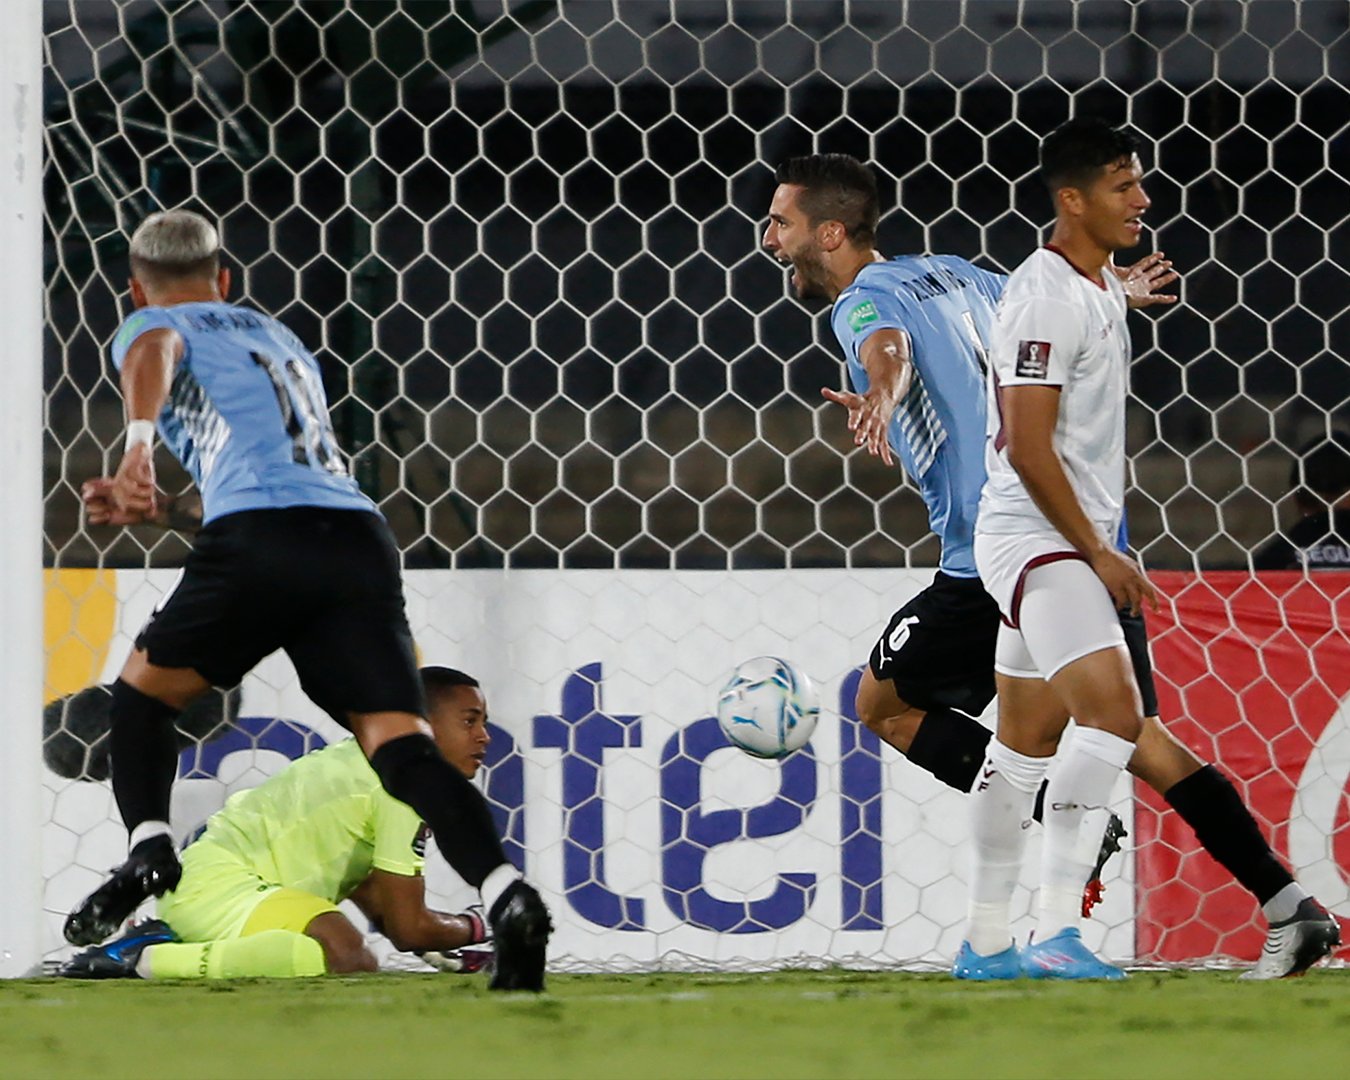 Bentancur, Suarez And Cavani,  All Found The Back Of The Goal In Uruguay's 4-1 Triumph Over Venezuela (Highlights)